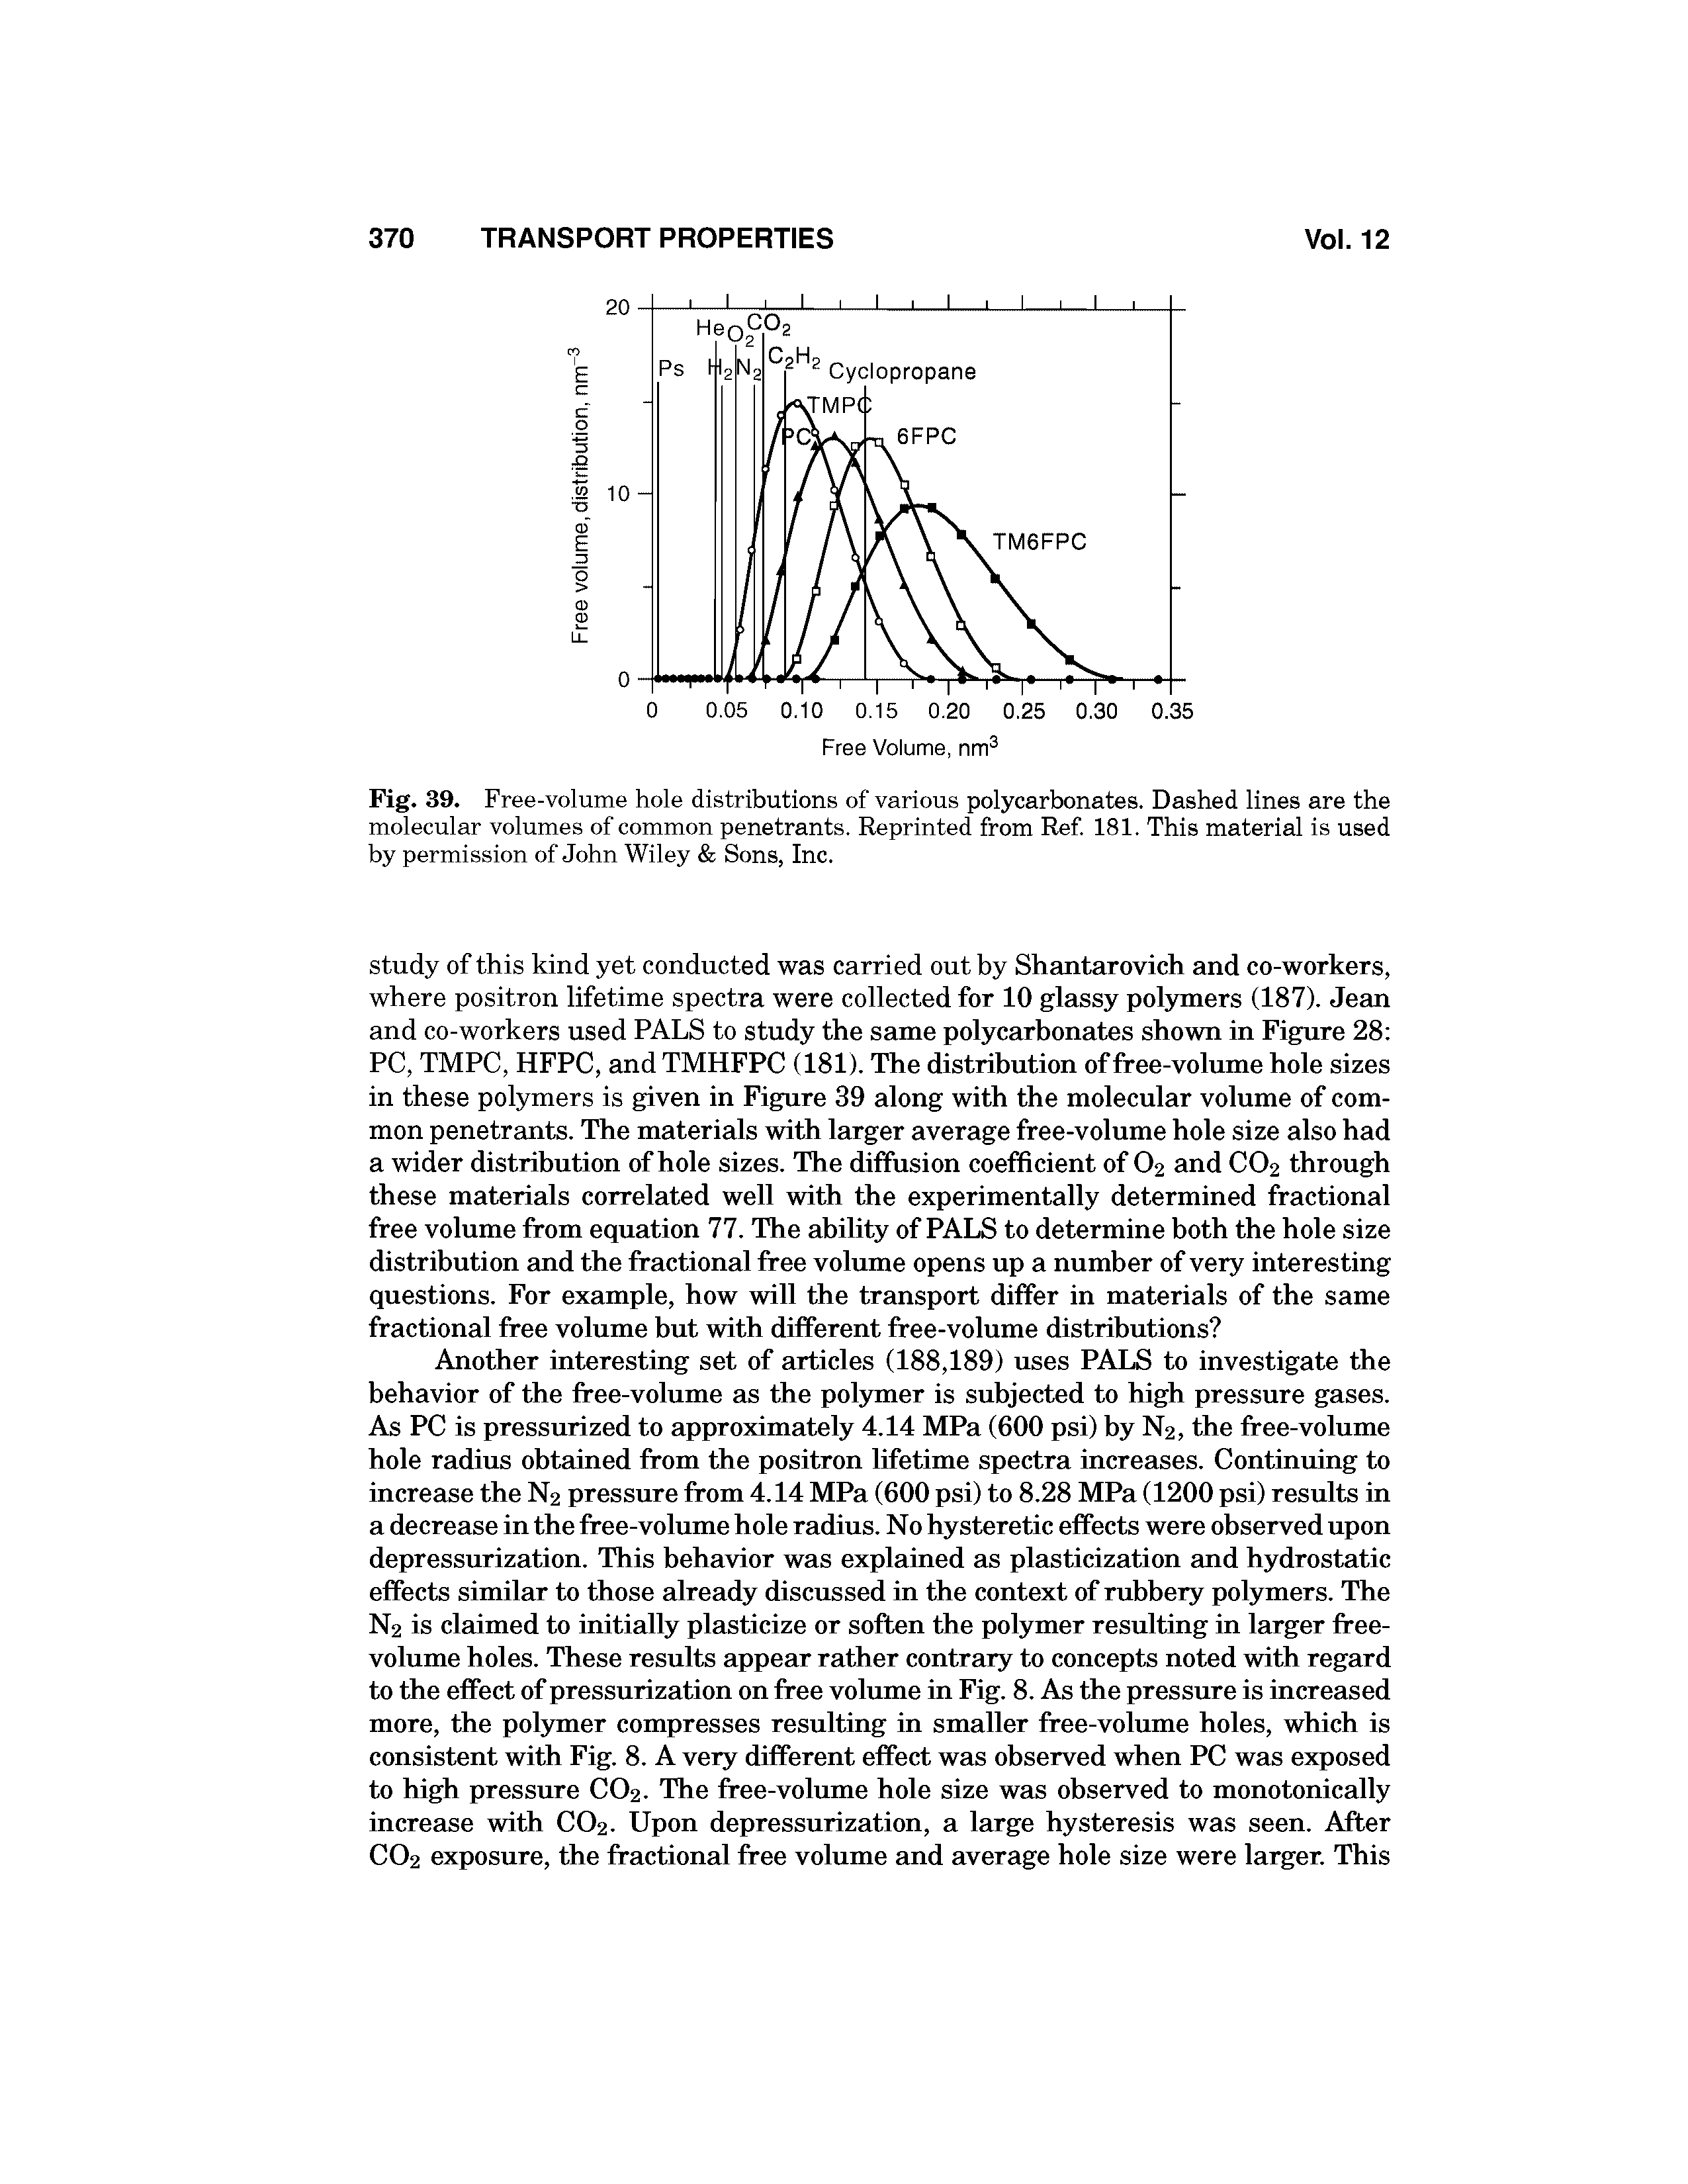 Fig. 39. Free-volume hole distributions of various polycarbonates. Dashed lines are the molecular volumes of common penetrants. Reprinted from Ref 181. This material is used by permission of John Wiley Sons, Inc.